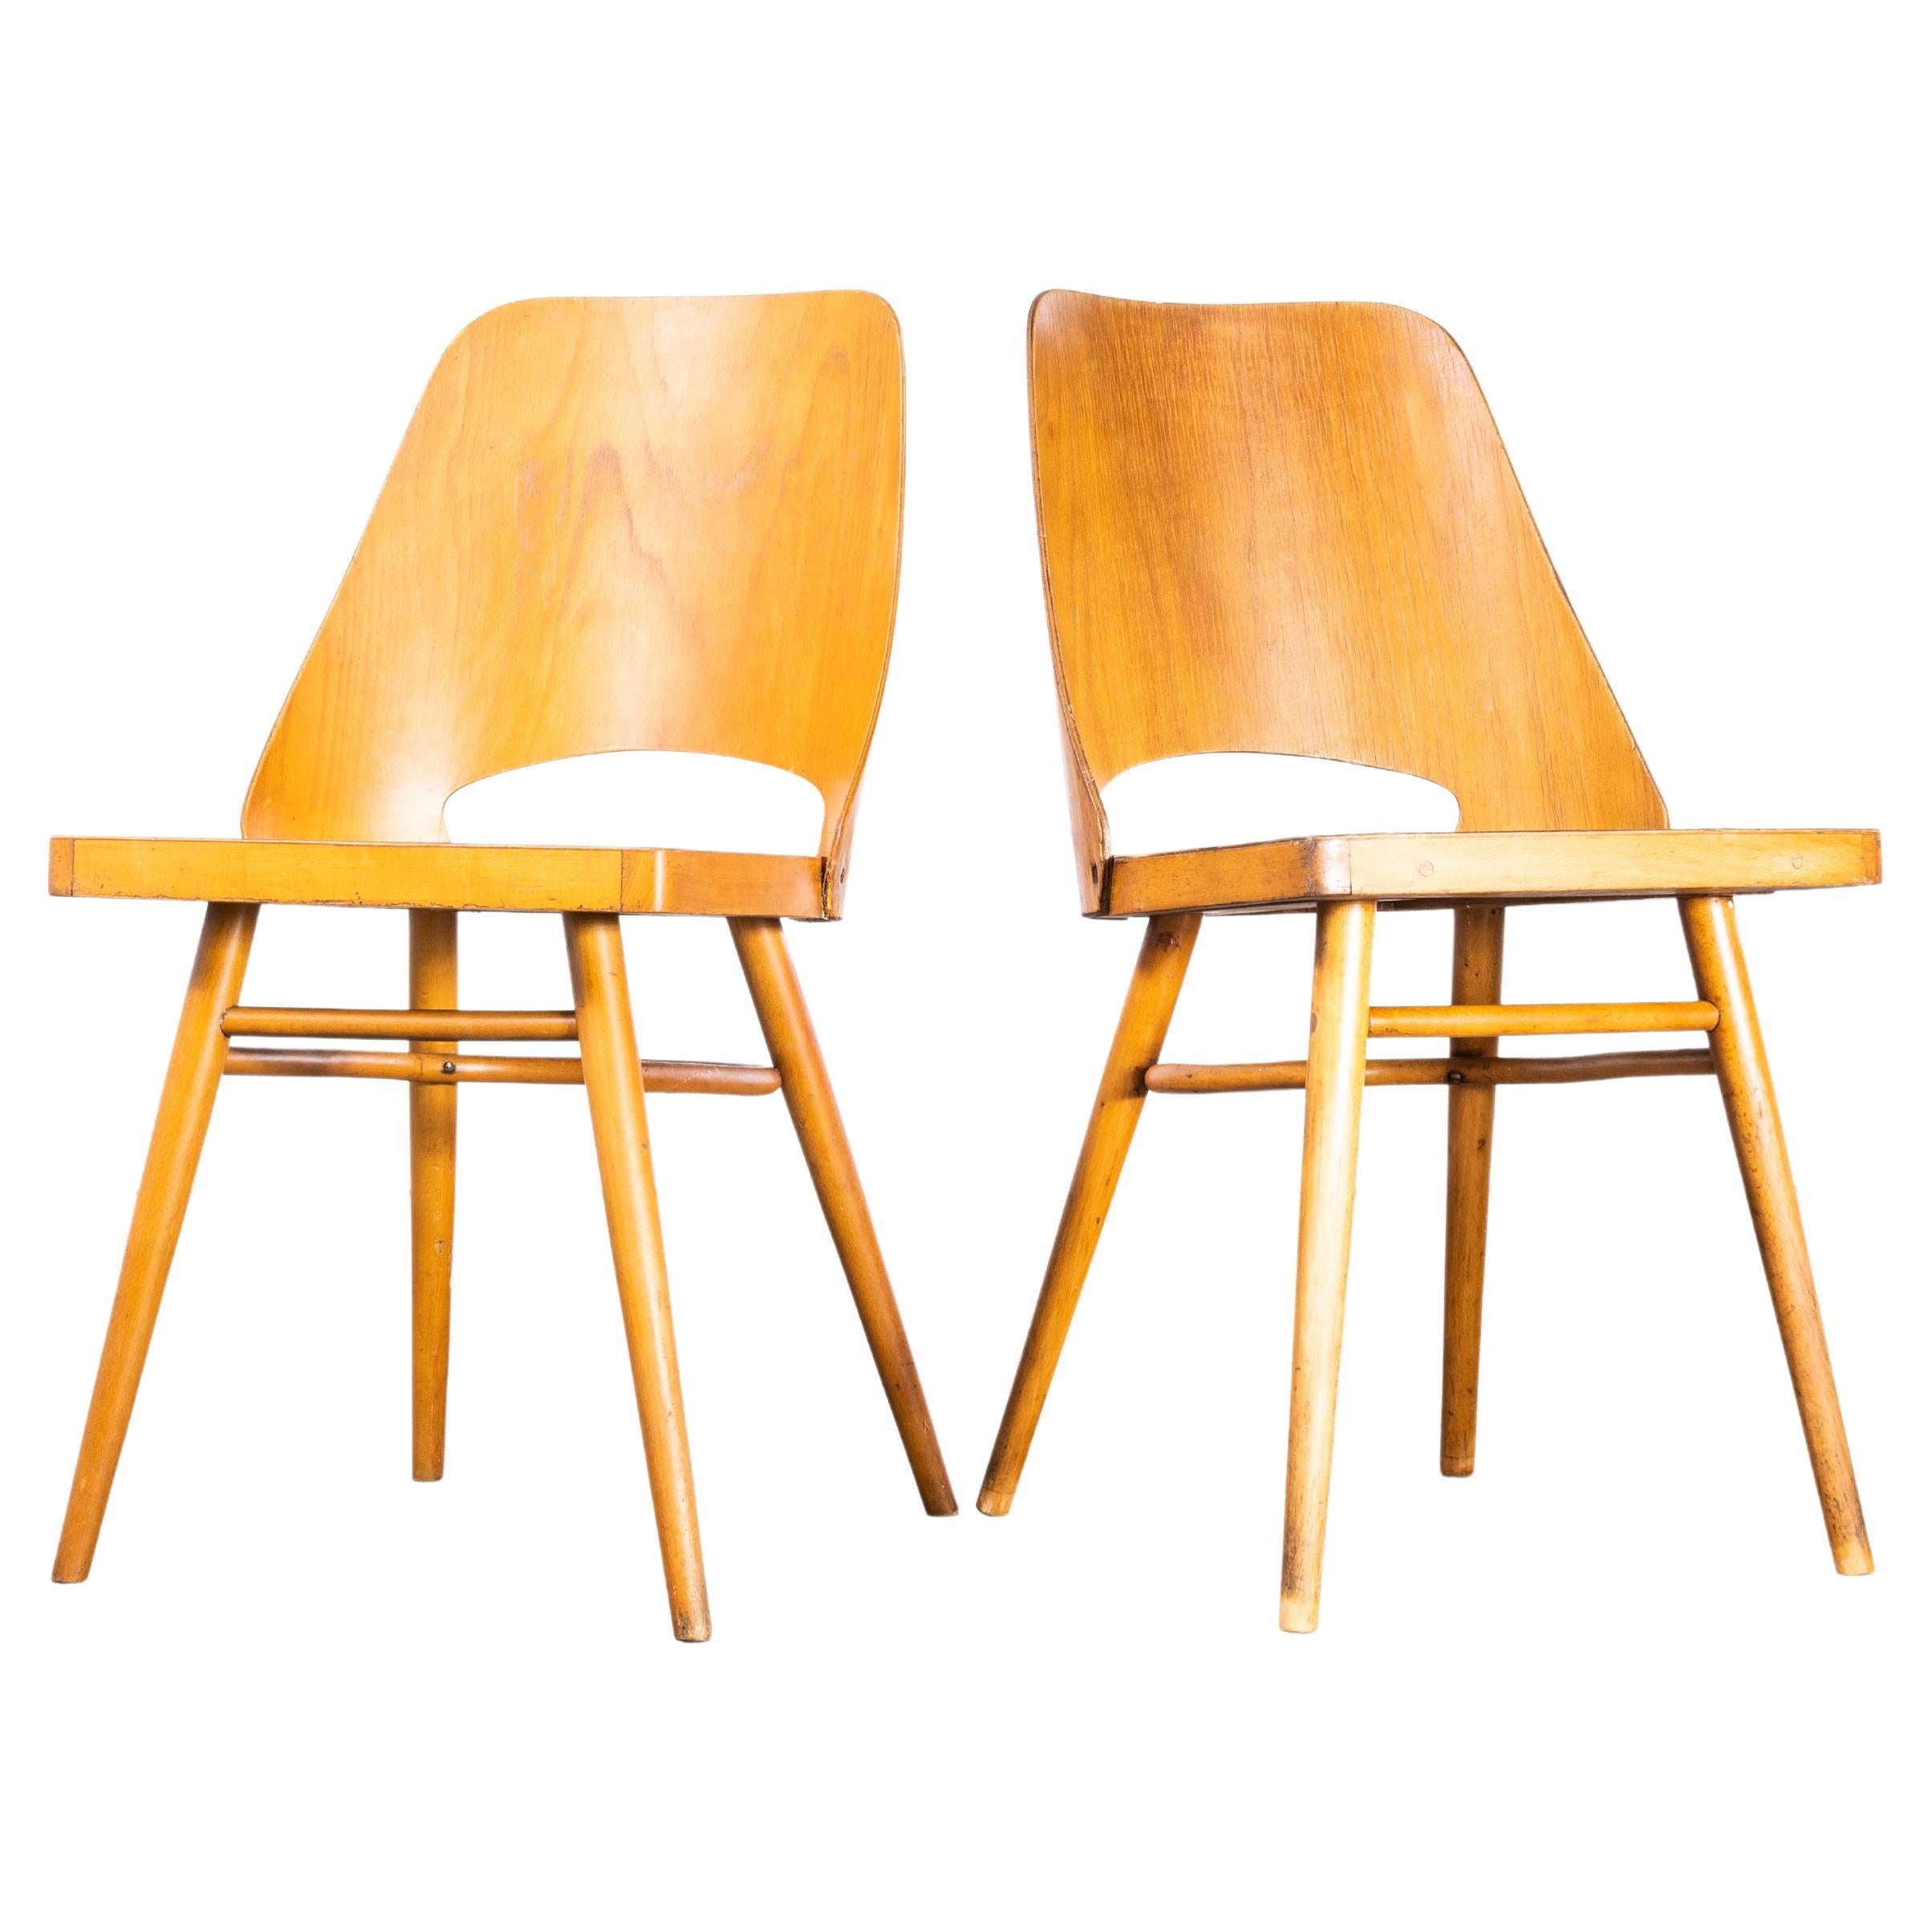 1950's Honey Beech Dining Chairs By Radomir Hoffman For Ton - Pair For Sale